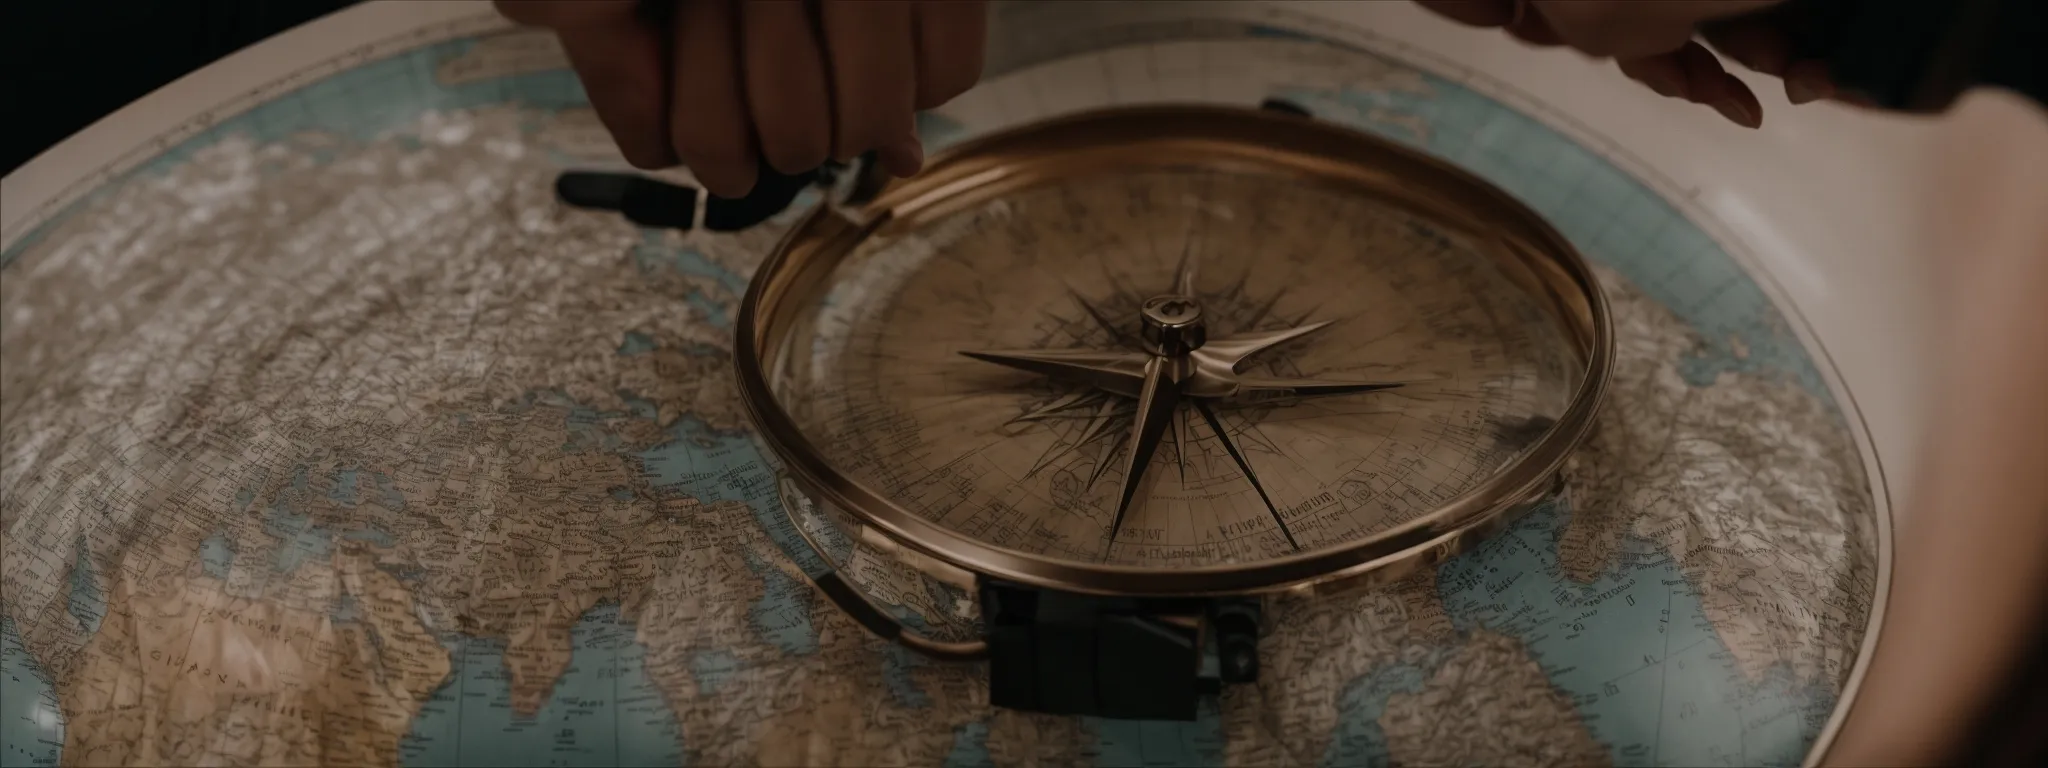 a person maps out a journey on a compass-adorned globe, symbolizing strategic keyword navigation.